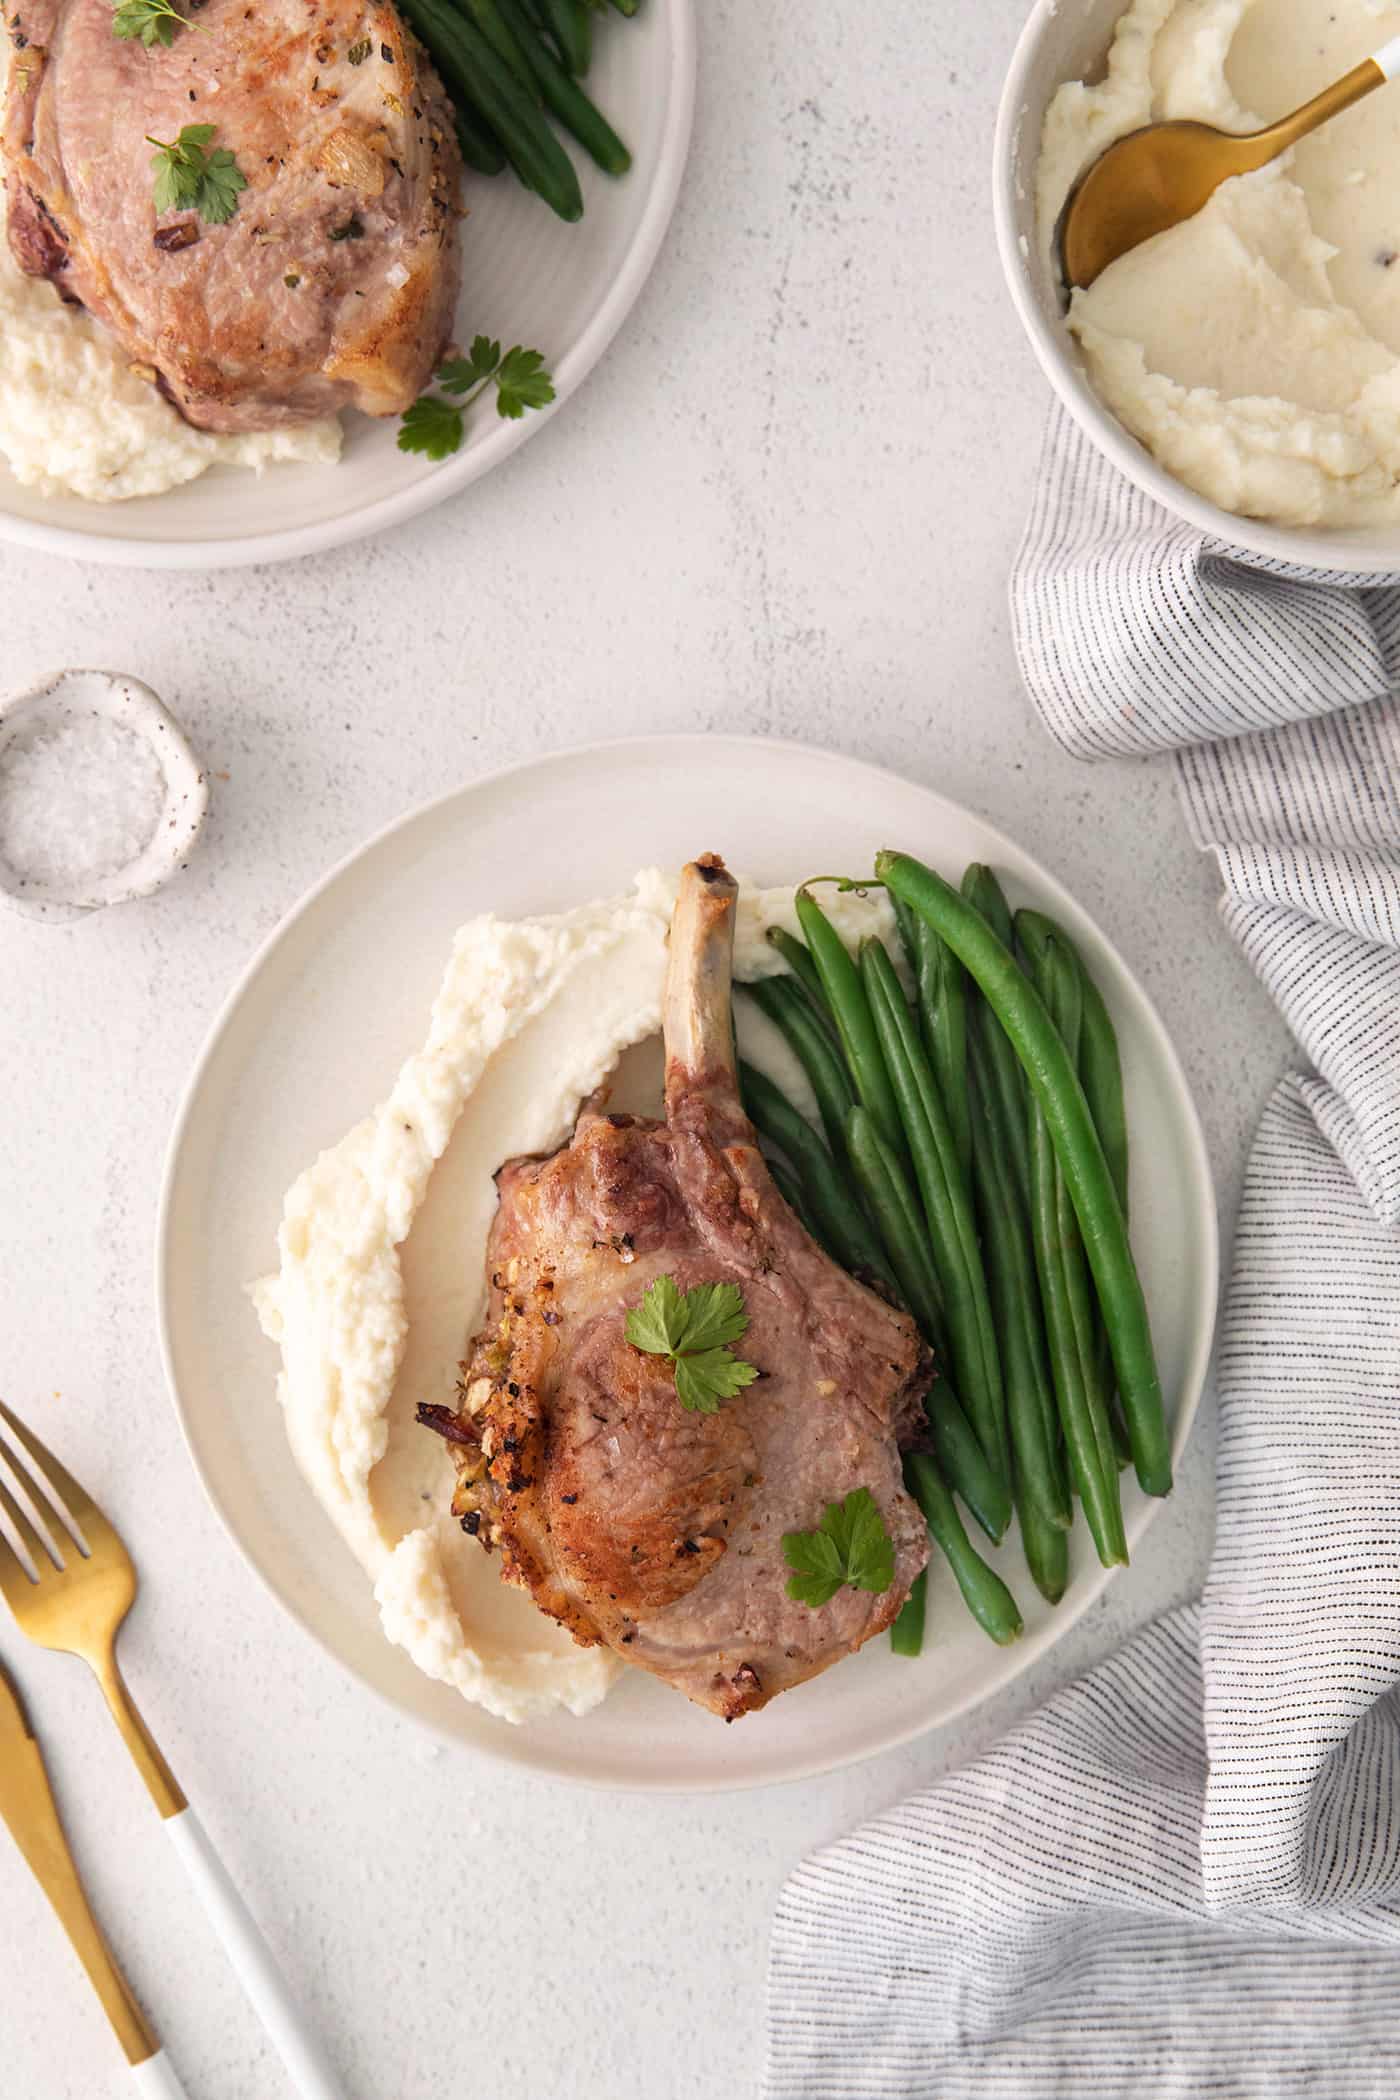 Overhead view of a stuffed pork chop with mashed potatoes and green beans